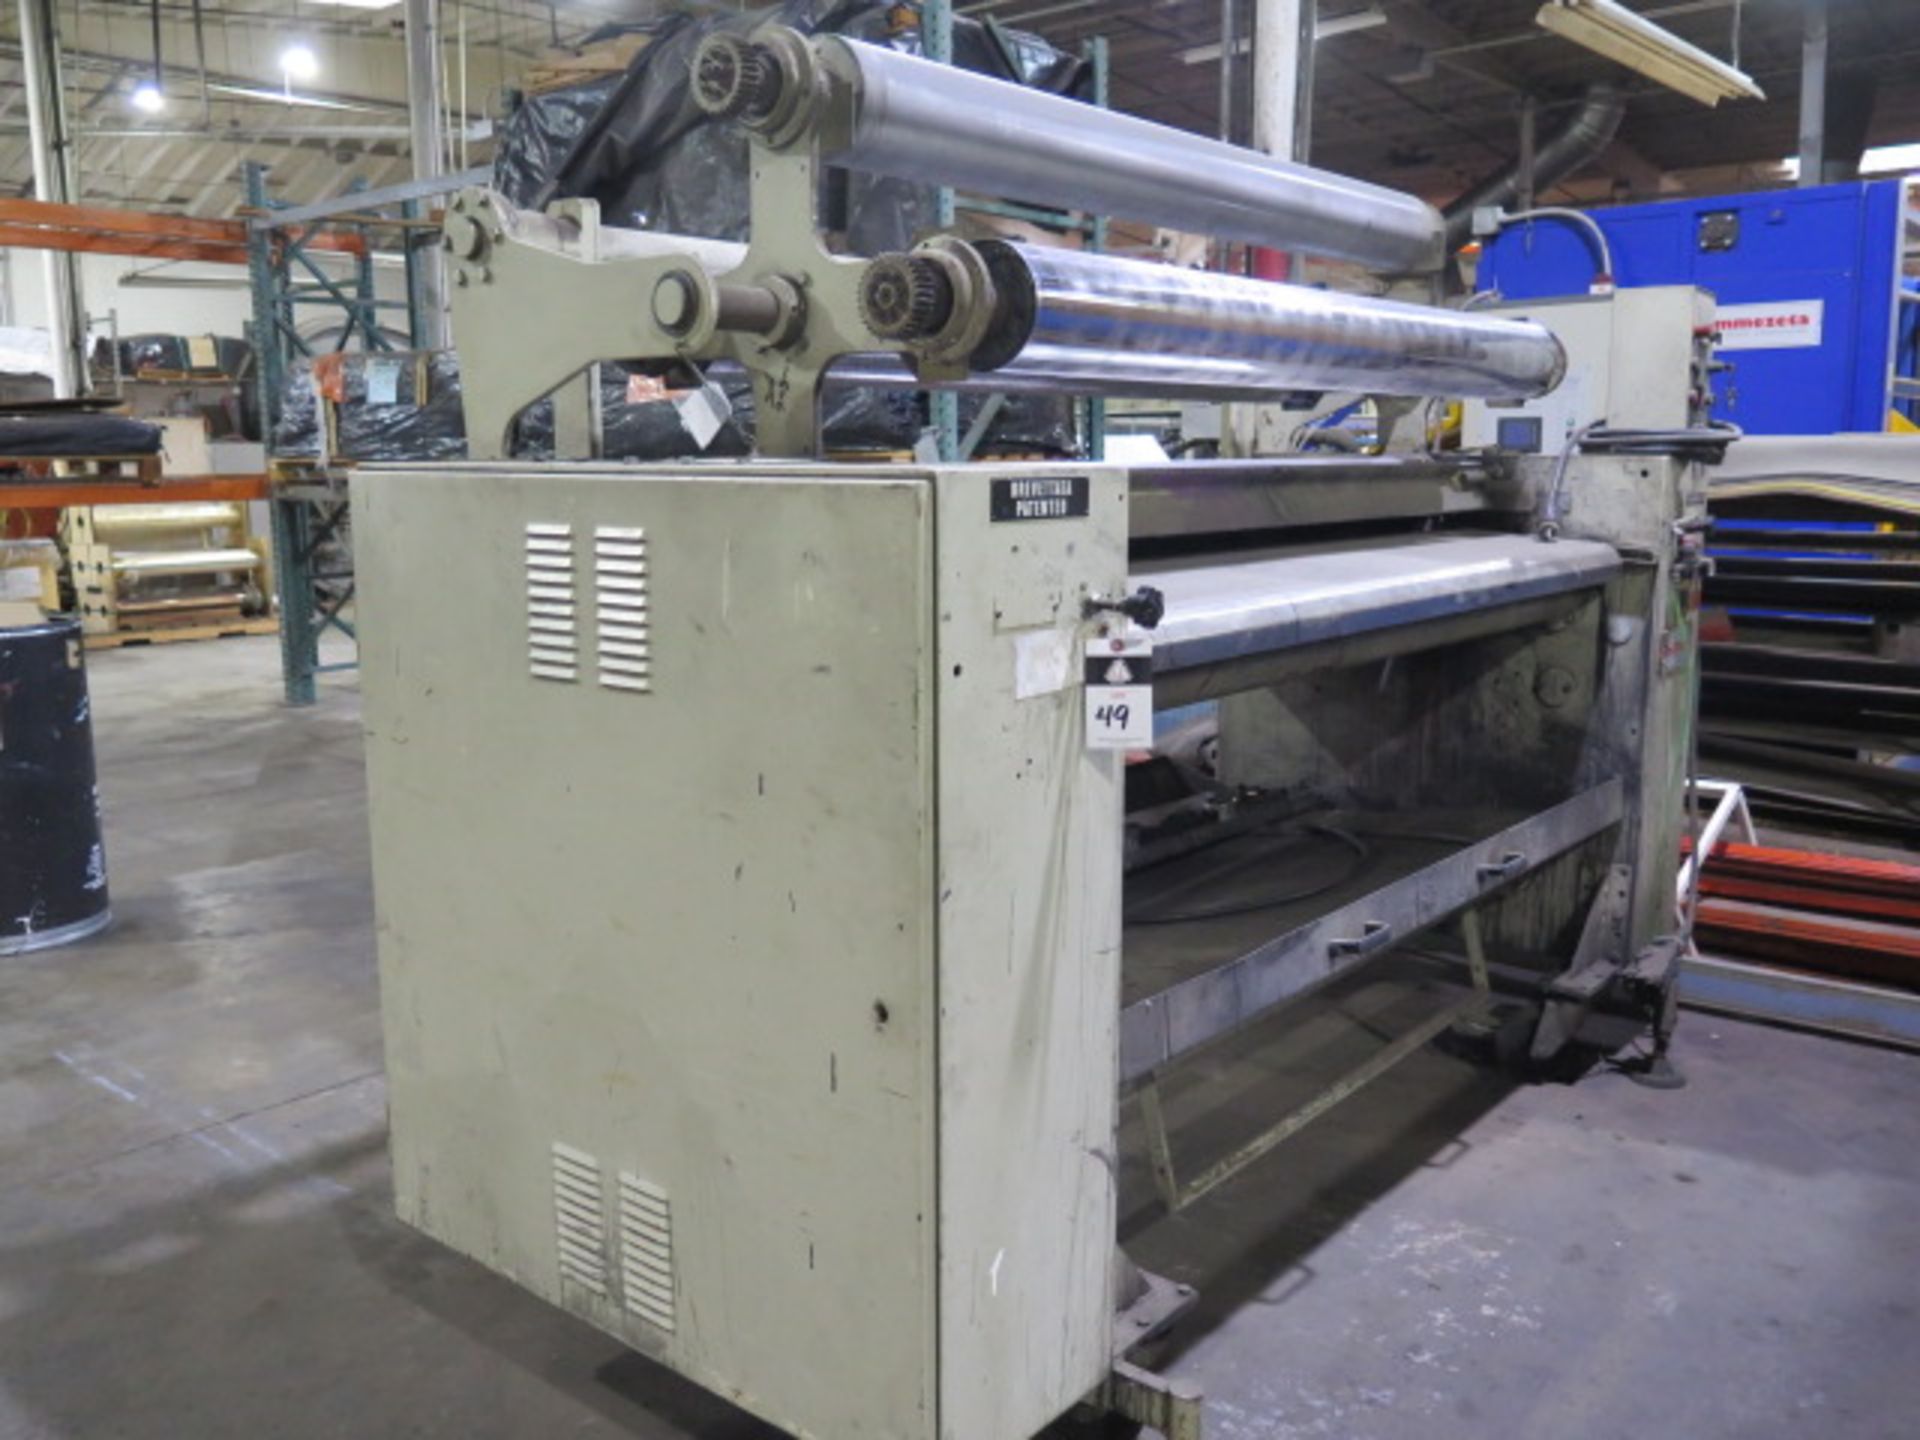 1997 Gemata “Rotoprint” 1800/4 75” Roller Coating Machine s/n 972046 (SOLD AS-IS - NO WARRANTY)